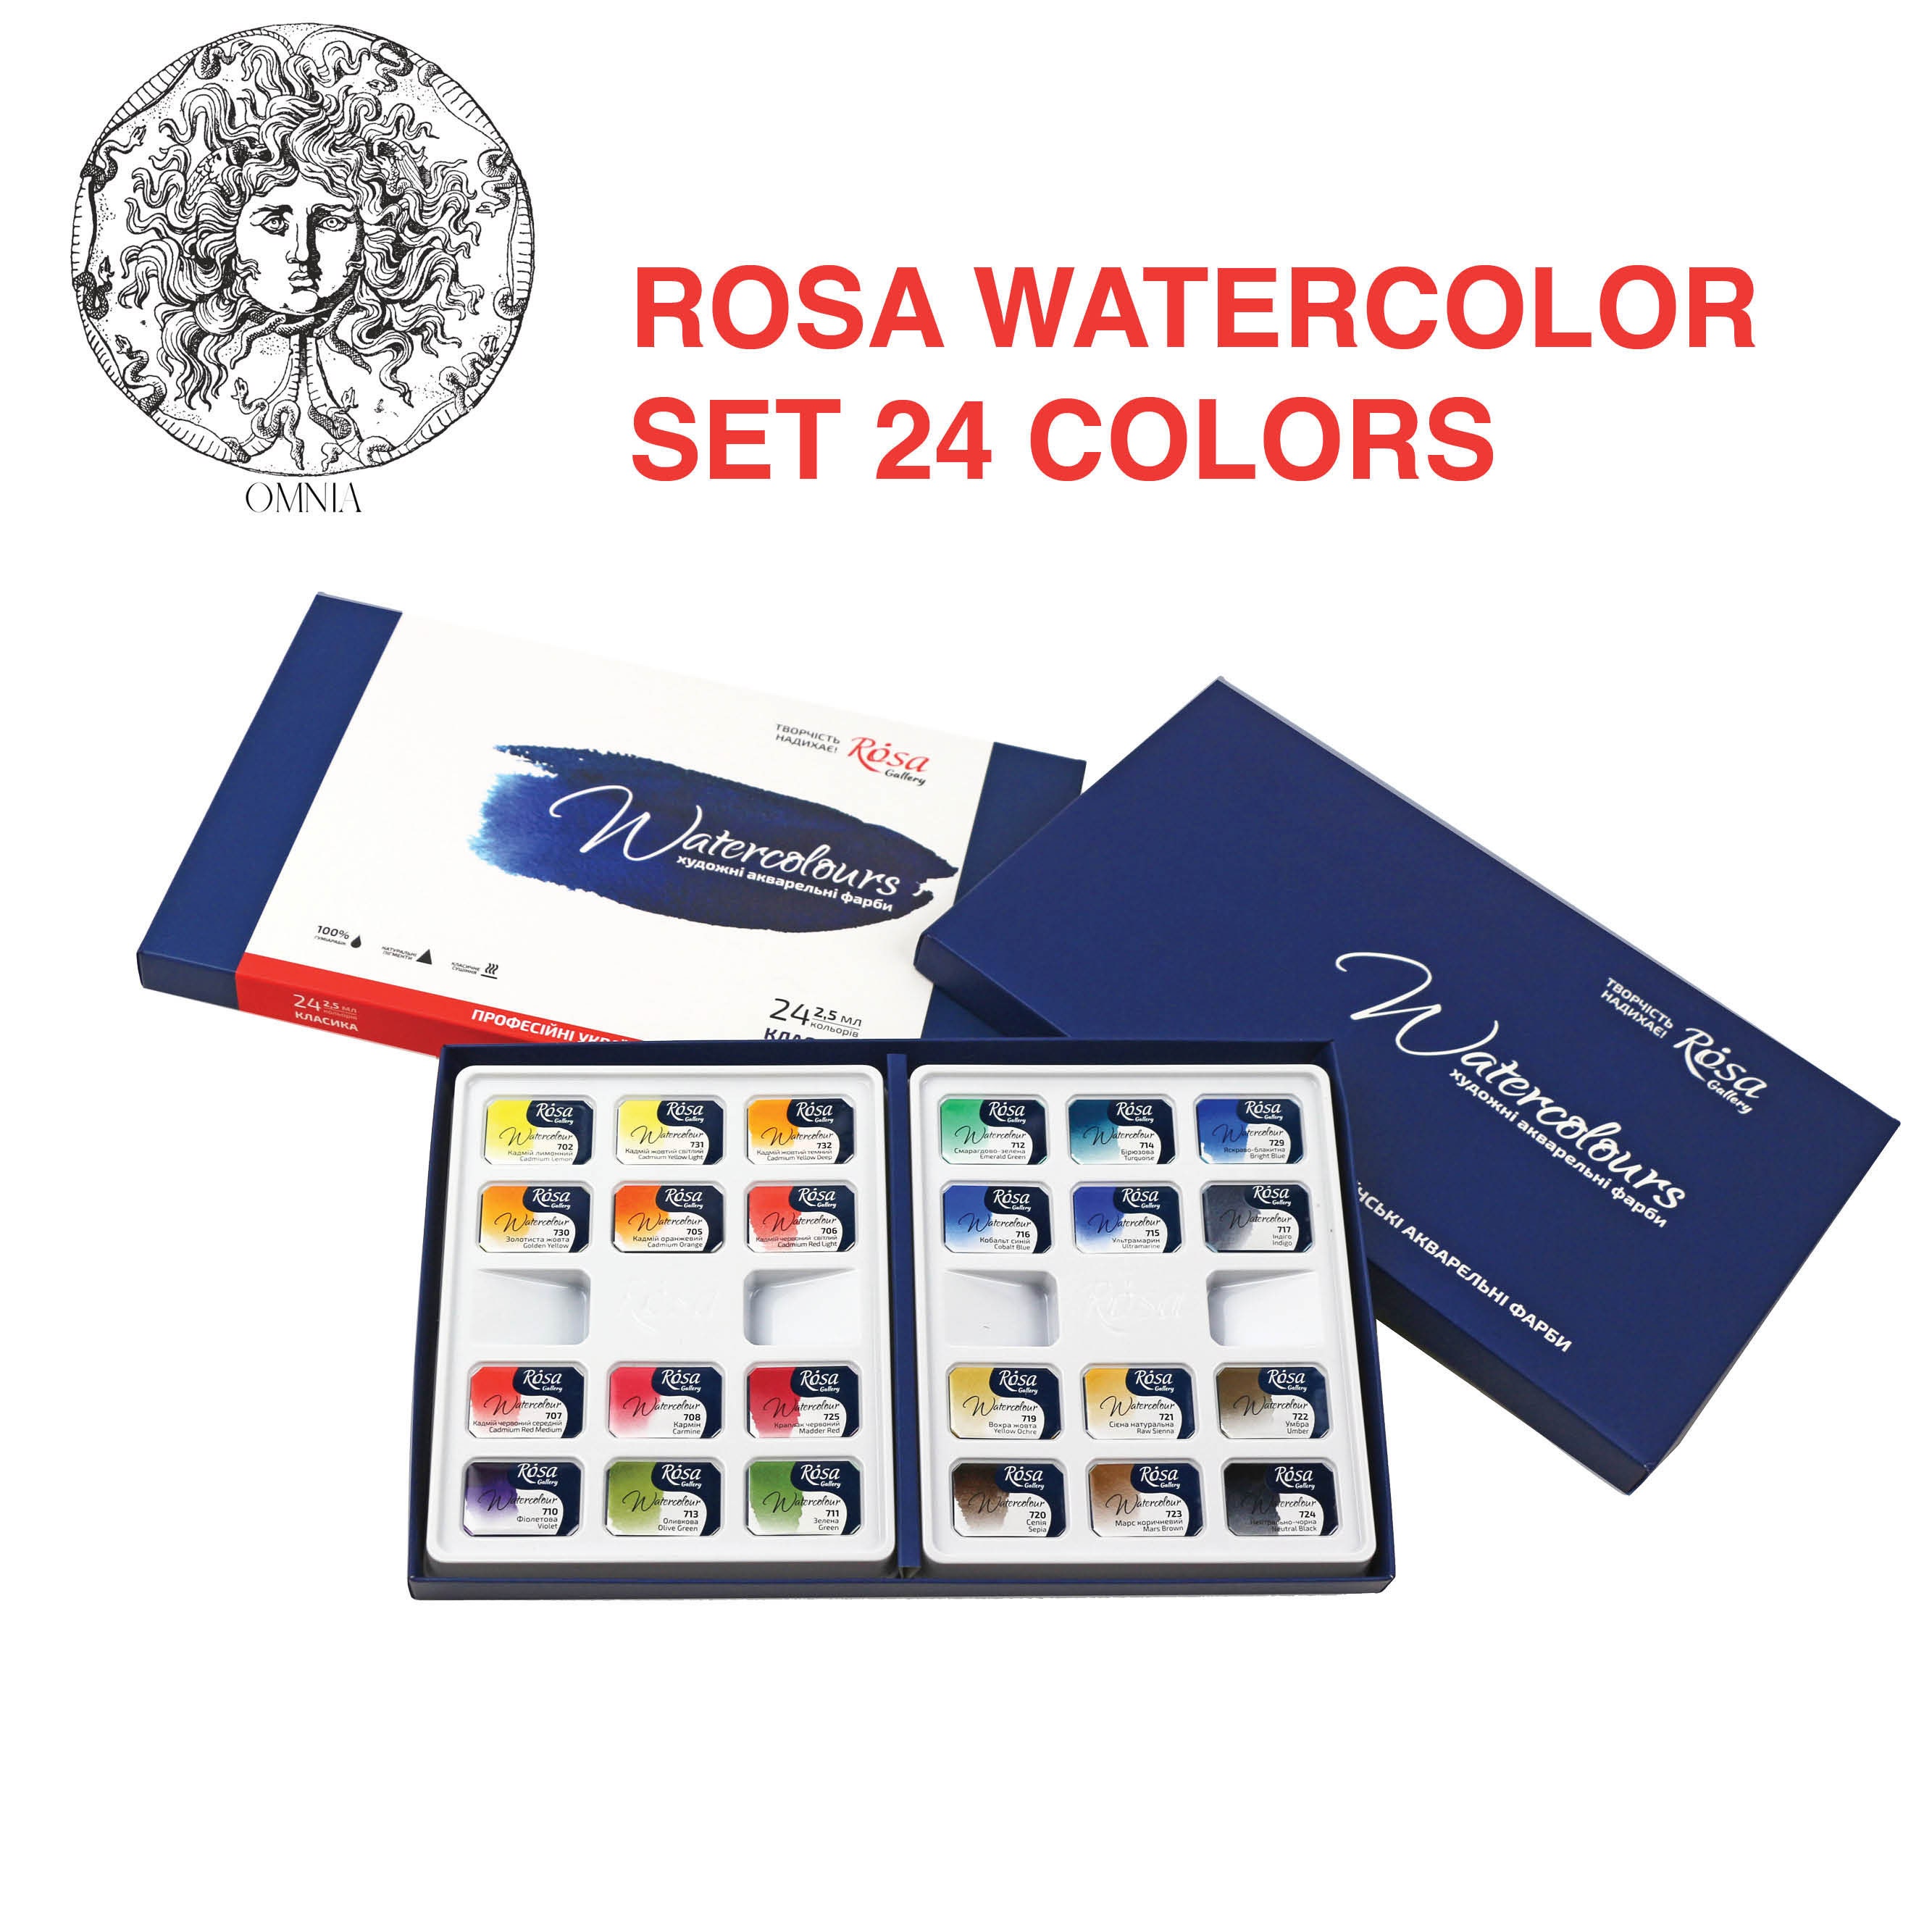 New thematic sets of ROSA Gallery watercolours